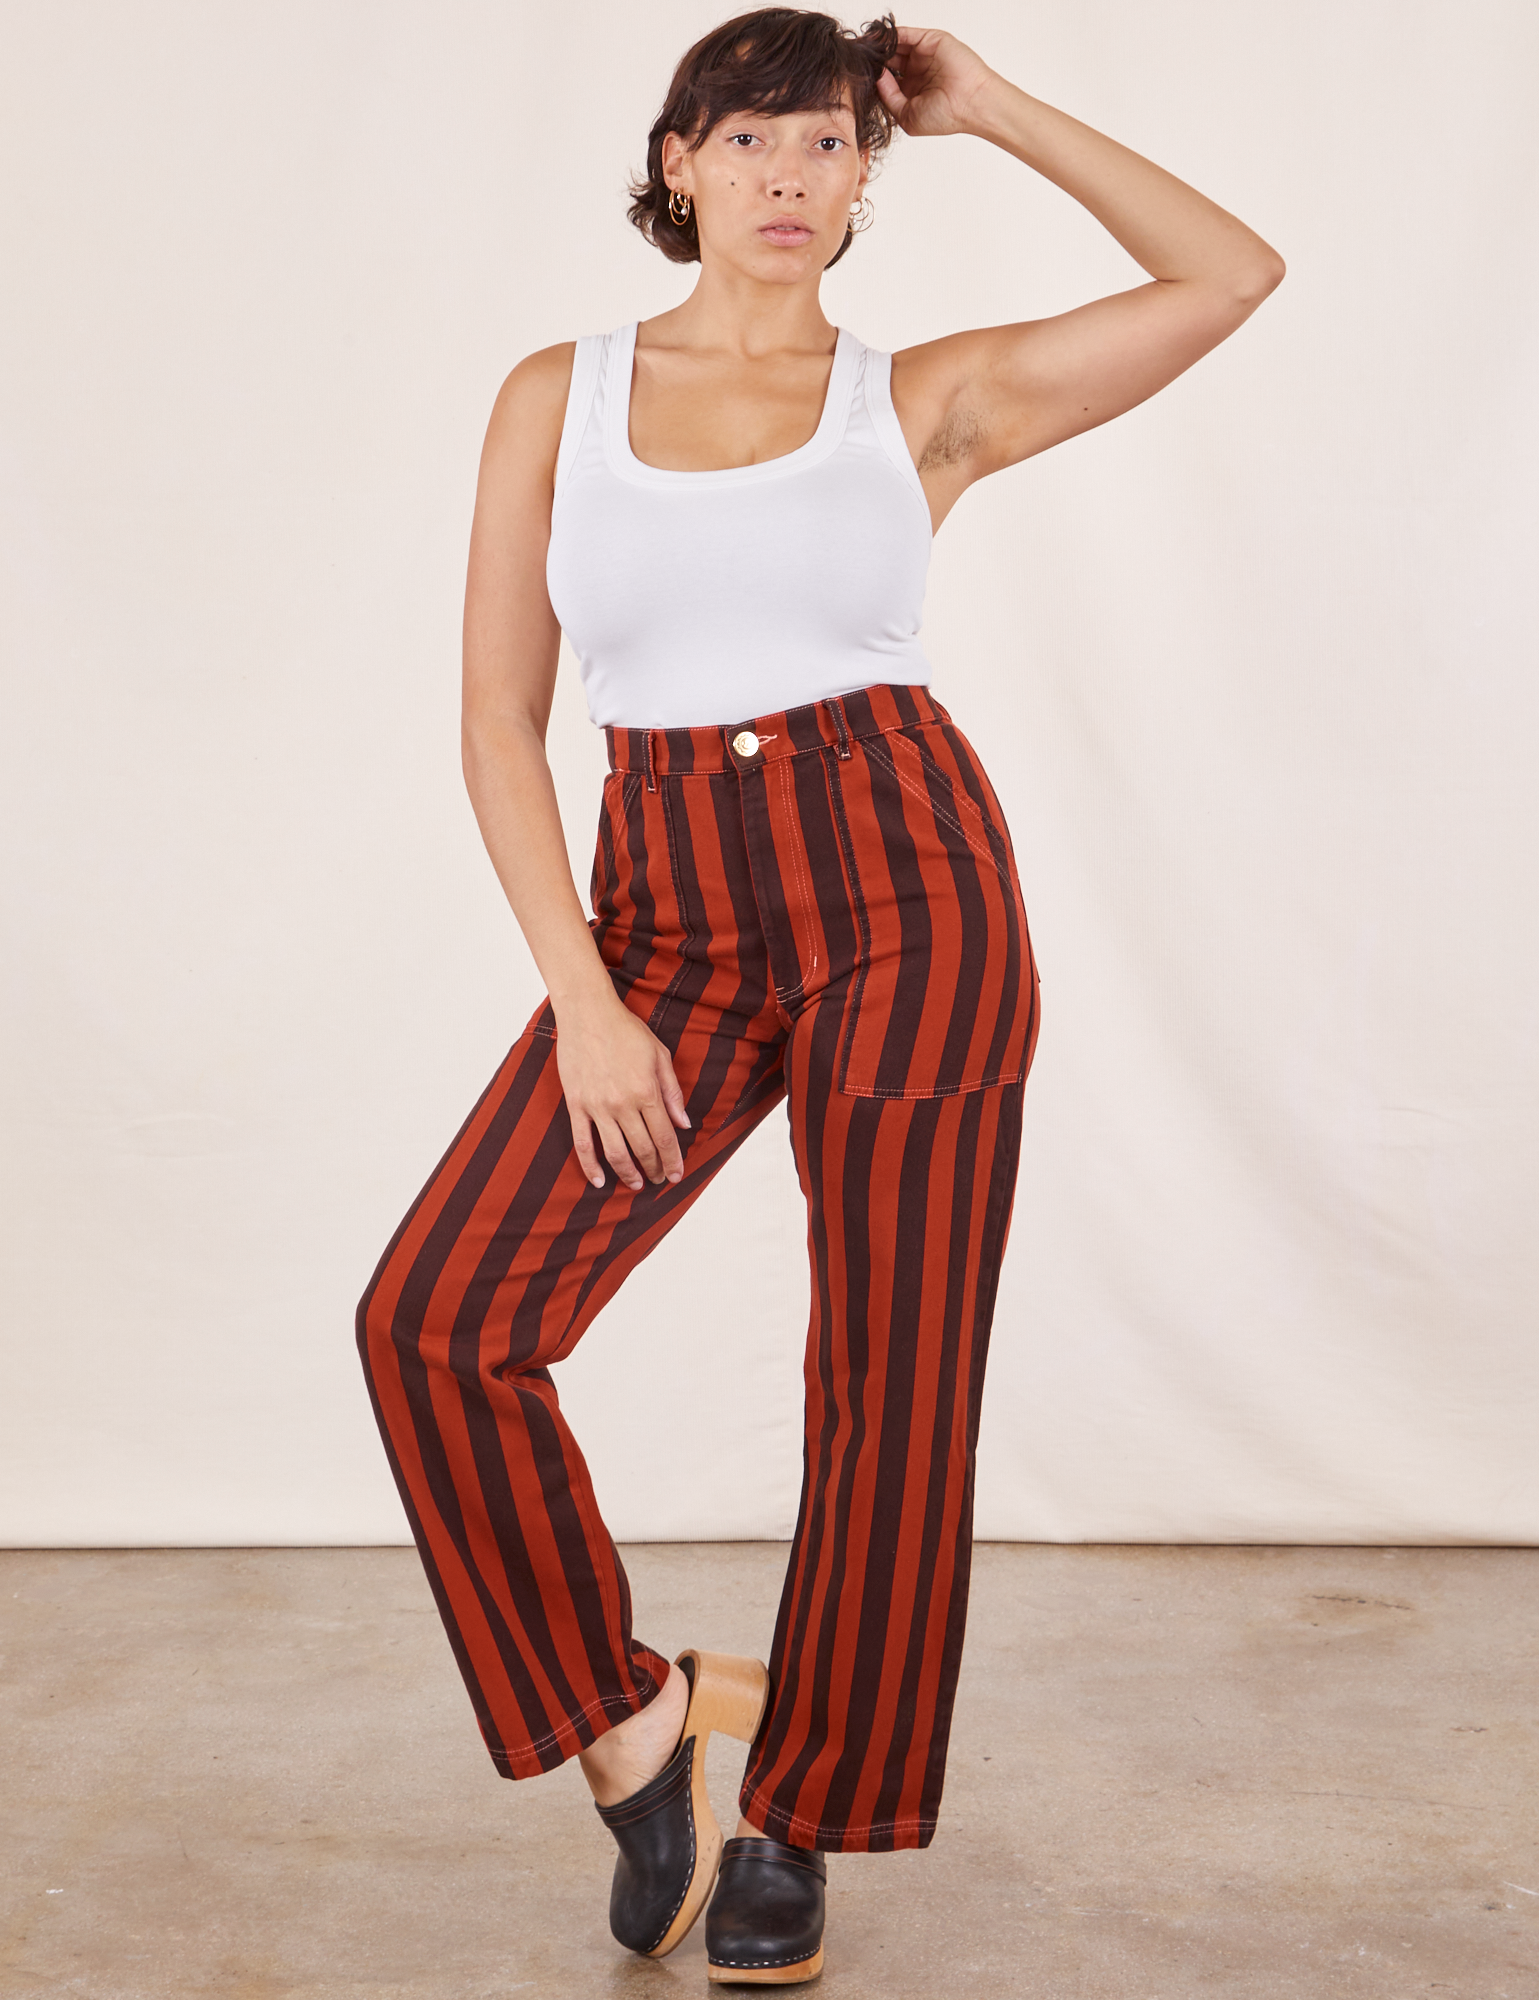 Tiara is 5&#39;4&quot; and wearing S Black Striped Work Pants in Paprika paired with vintage off-white Cropped Tank Top